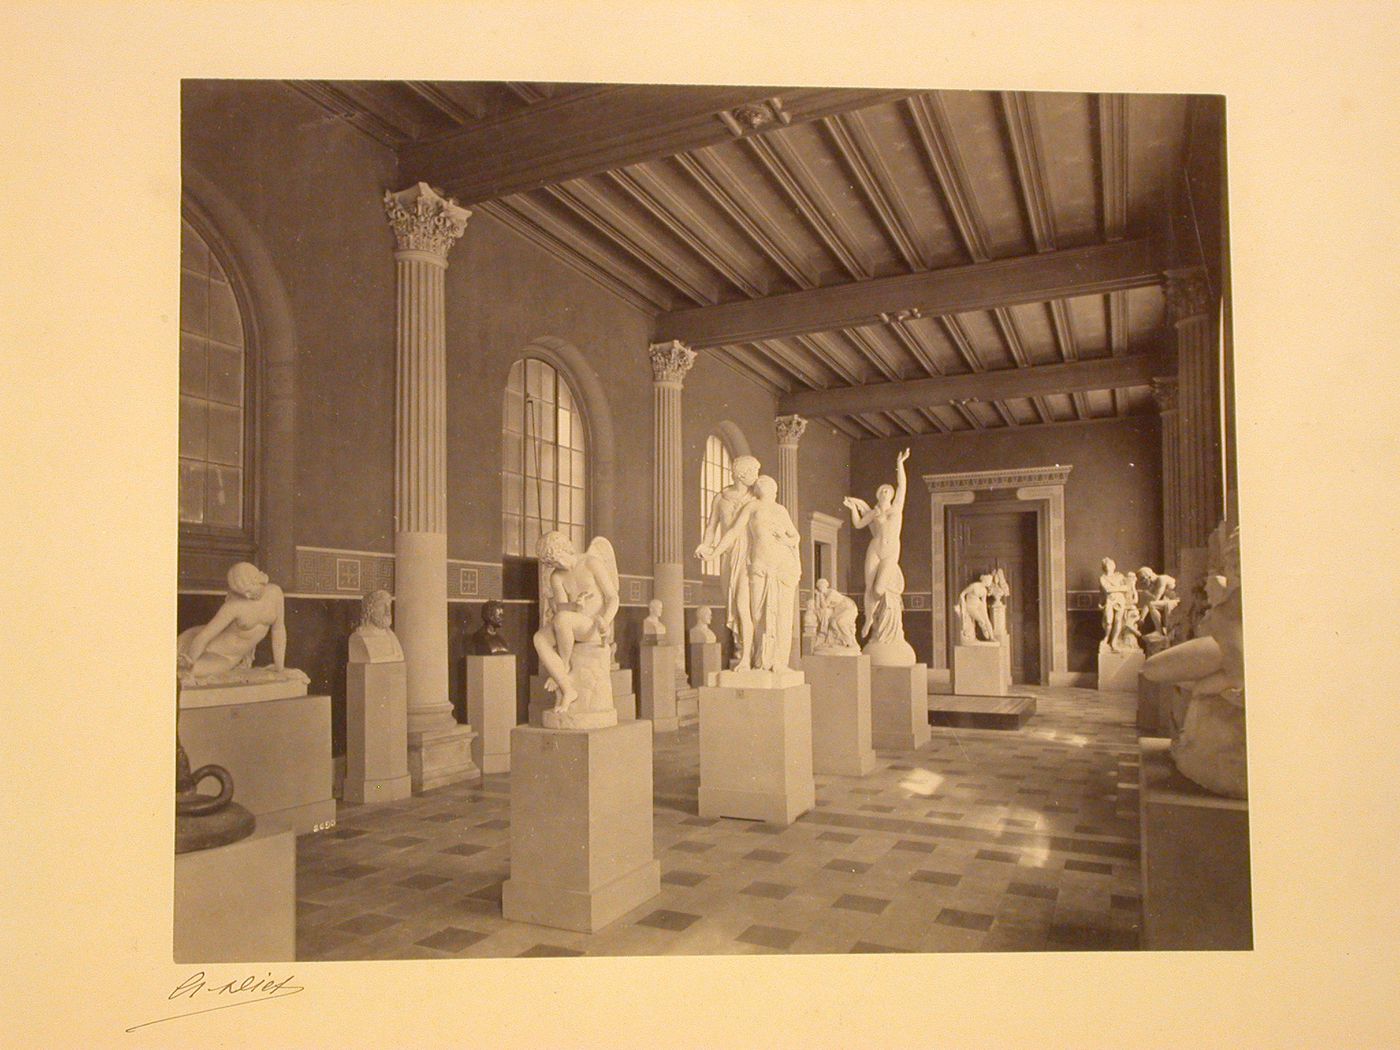 Musée d'Amiens: Room with sculpture on display, Amiens, France